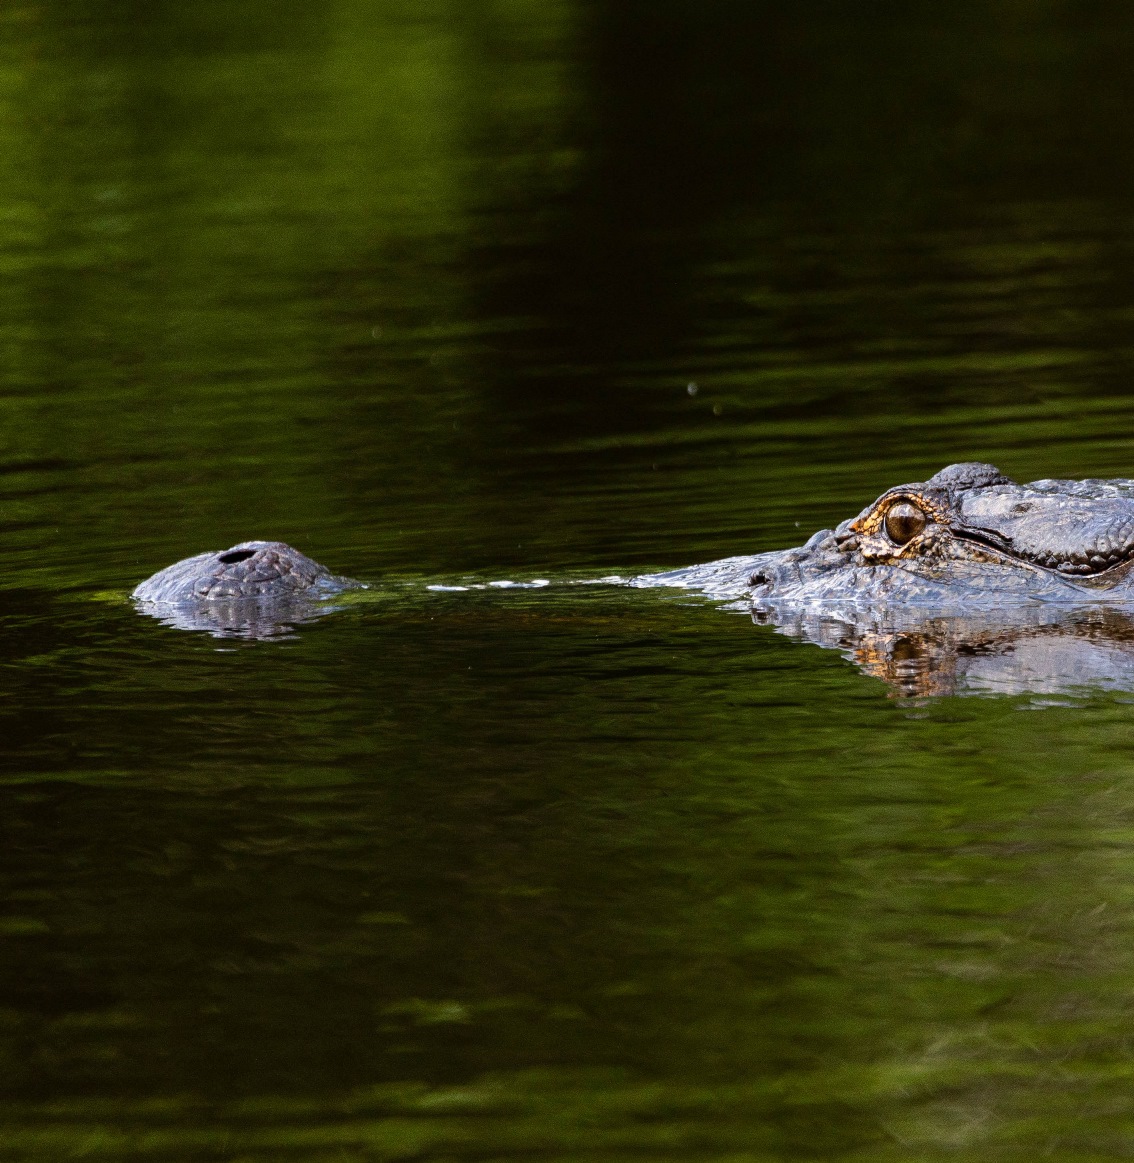 Alligator swimming while mostly submerged, its eyes and nose visible above the water